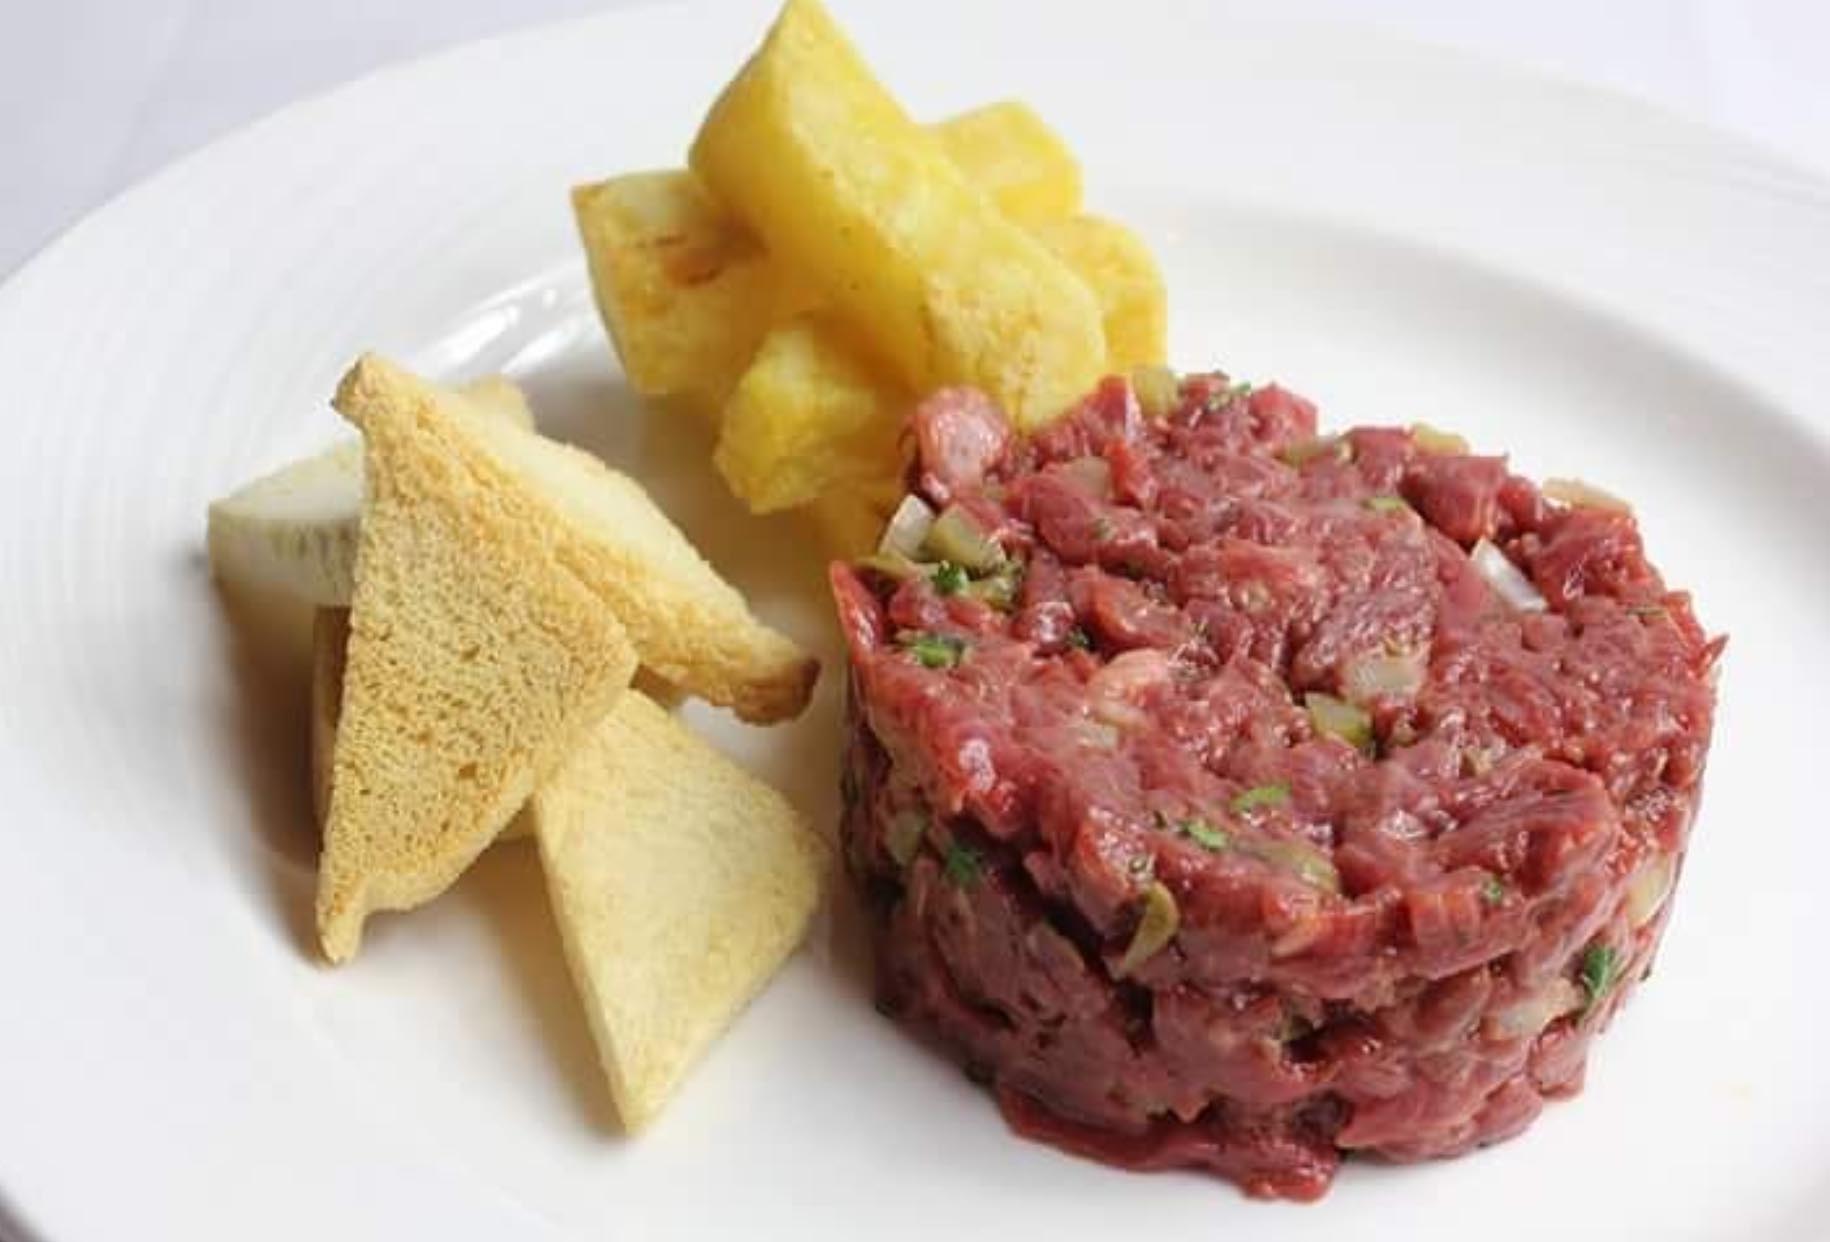 French-style Steak Tartare prepared in room with Puente Nuevo Potatoes